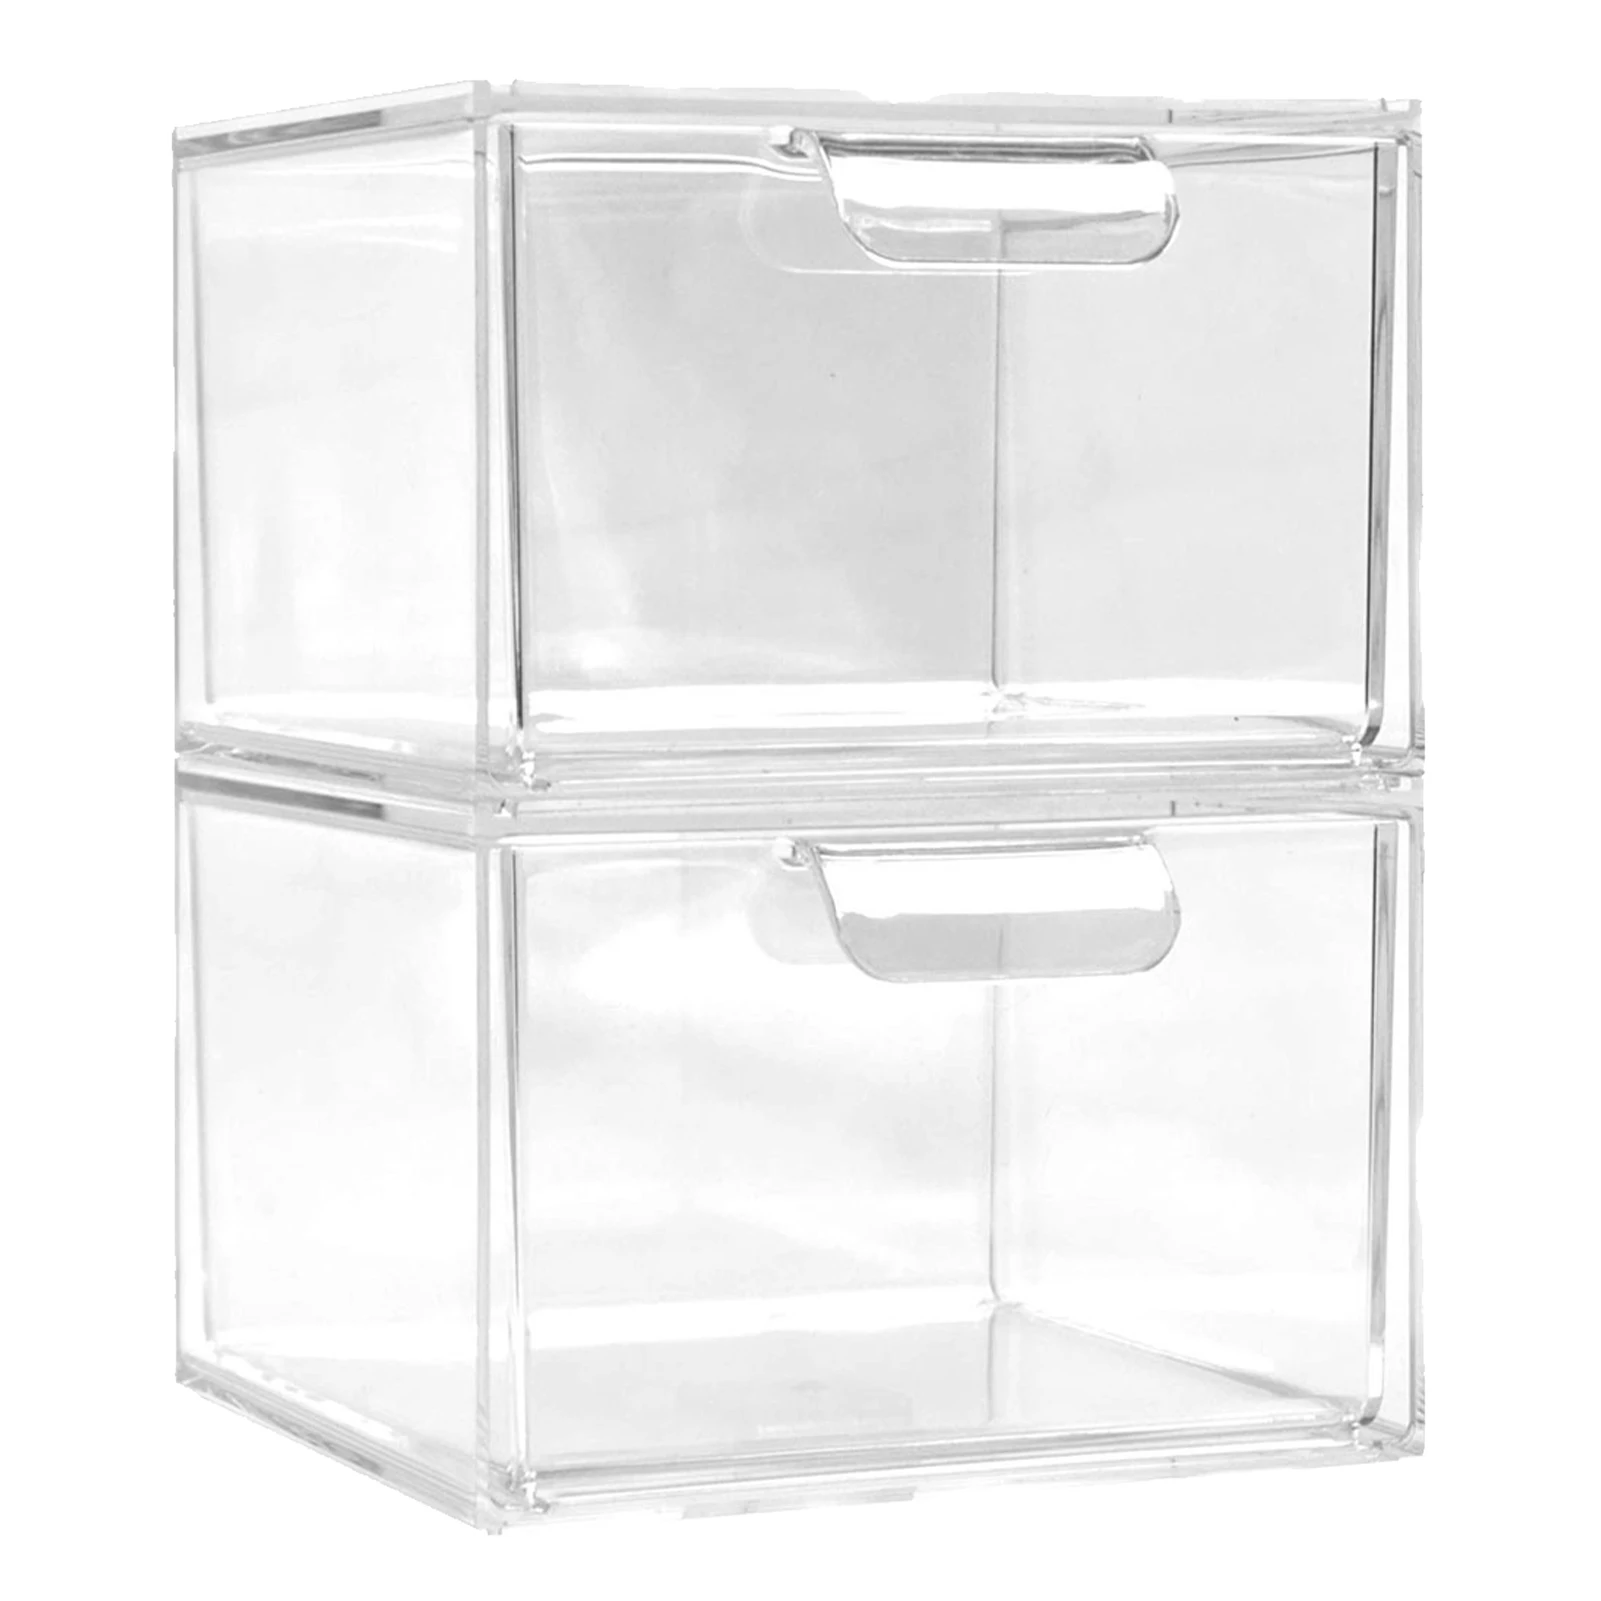 

Stable Snacks Clear Plastic Safe Lightweight Stackable Vanity With Drawers Multifunctional Makeup Organizer Jewelry Space Saving